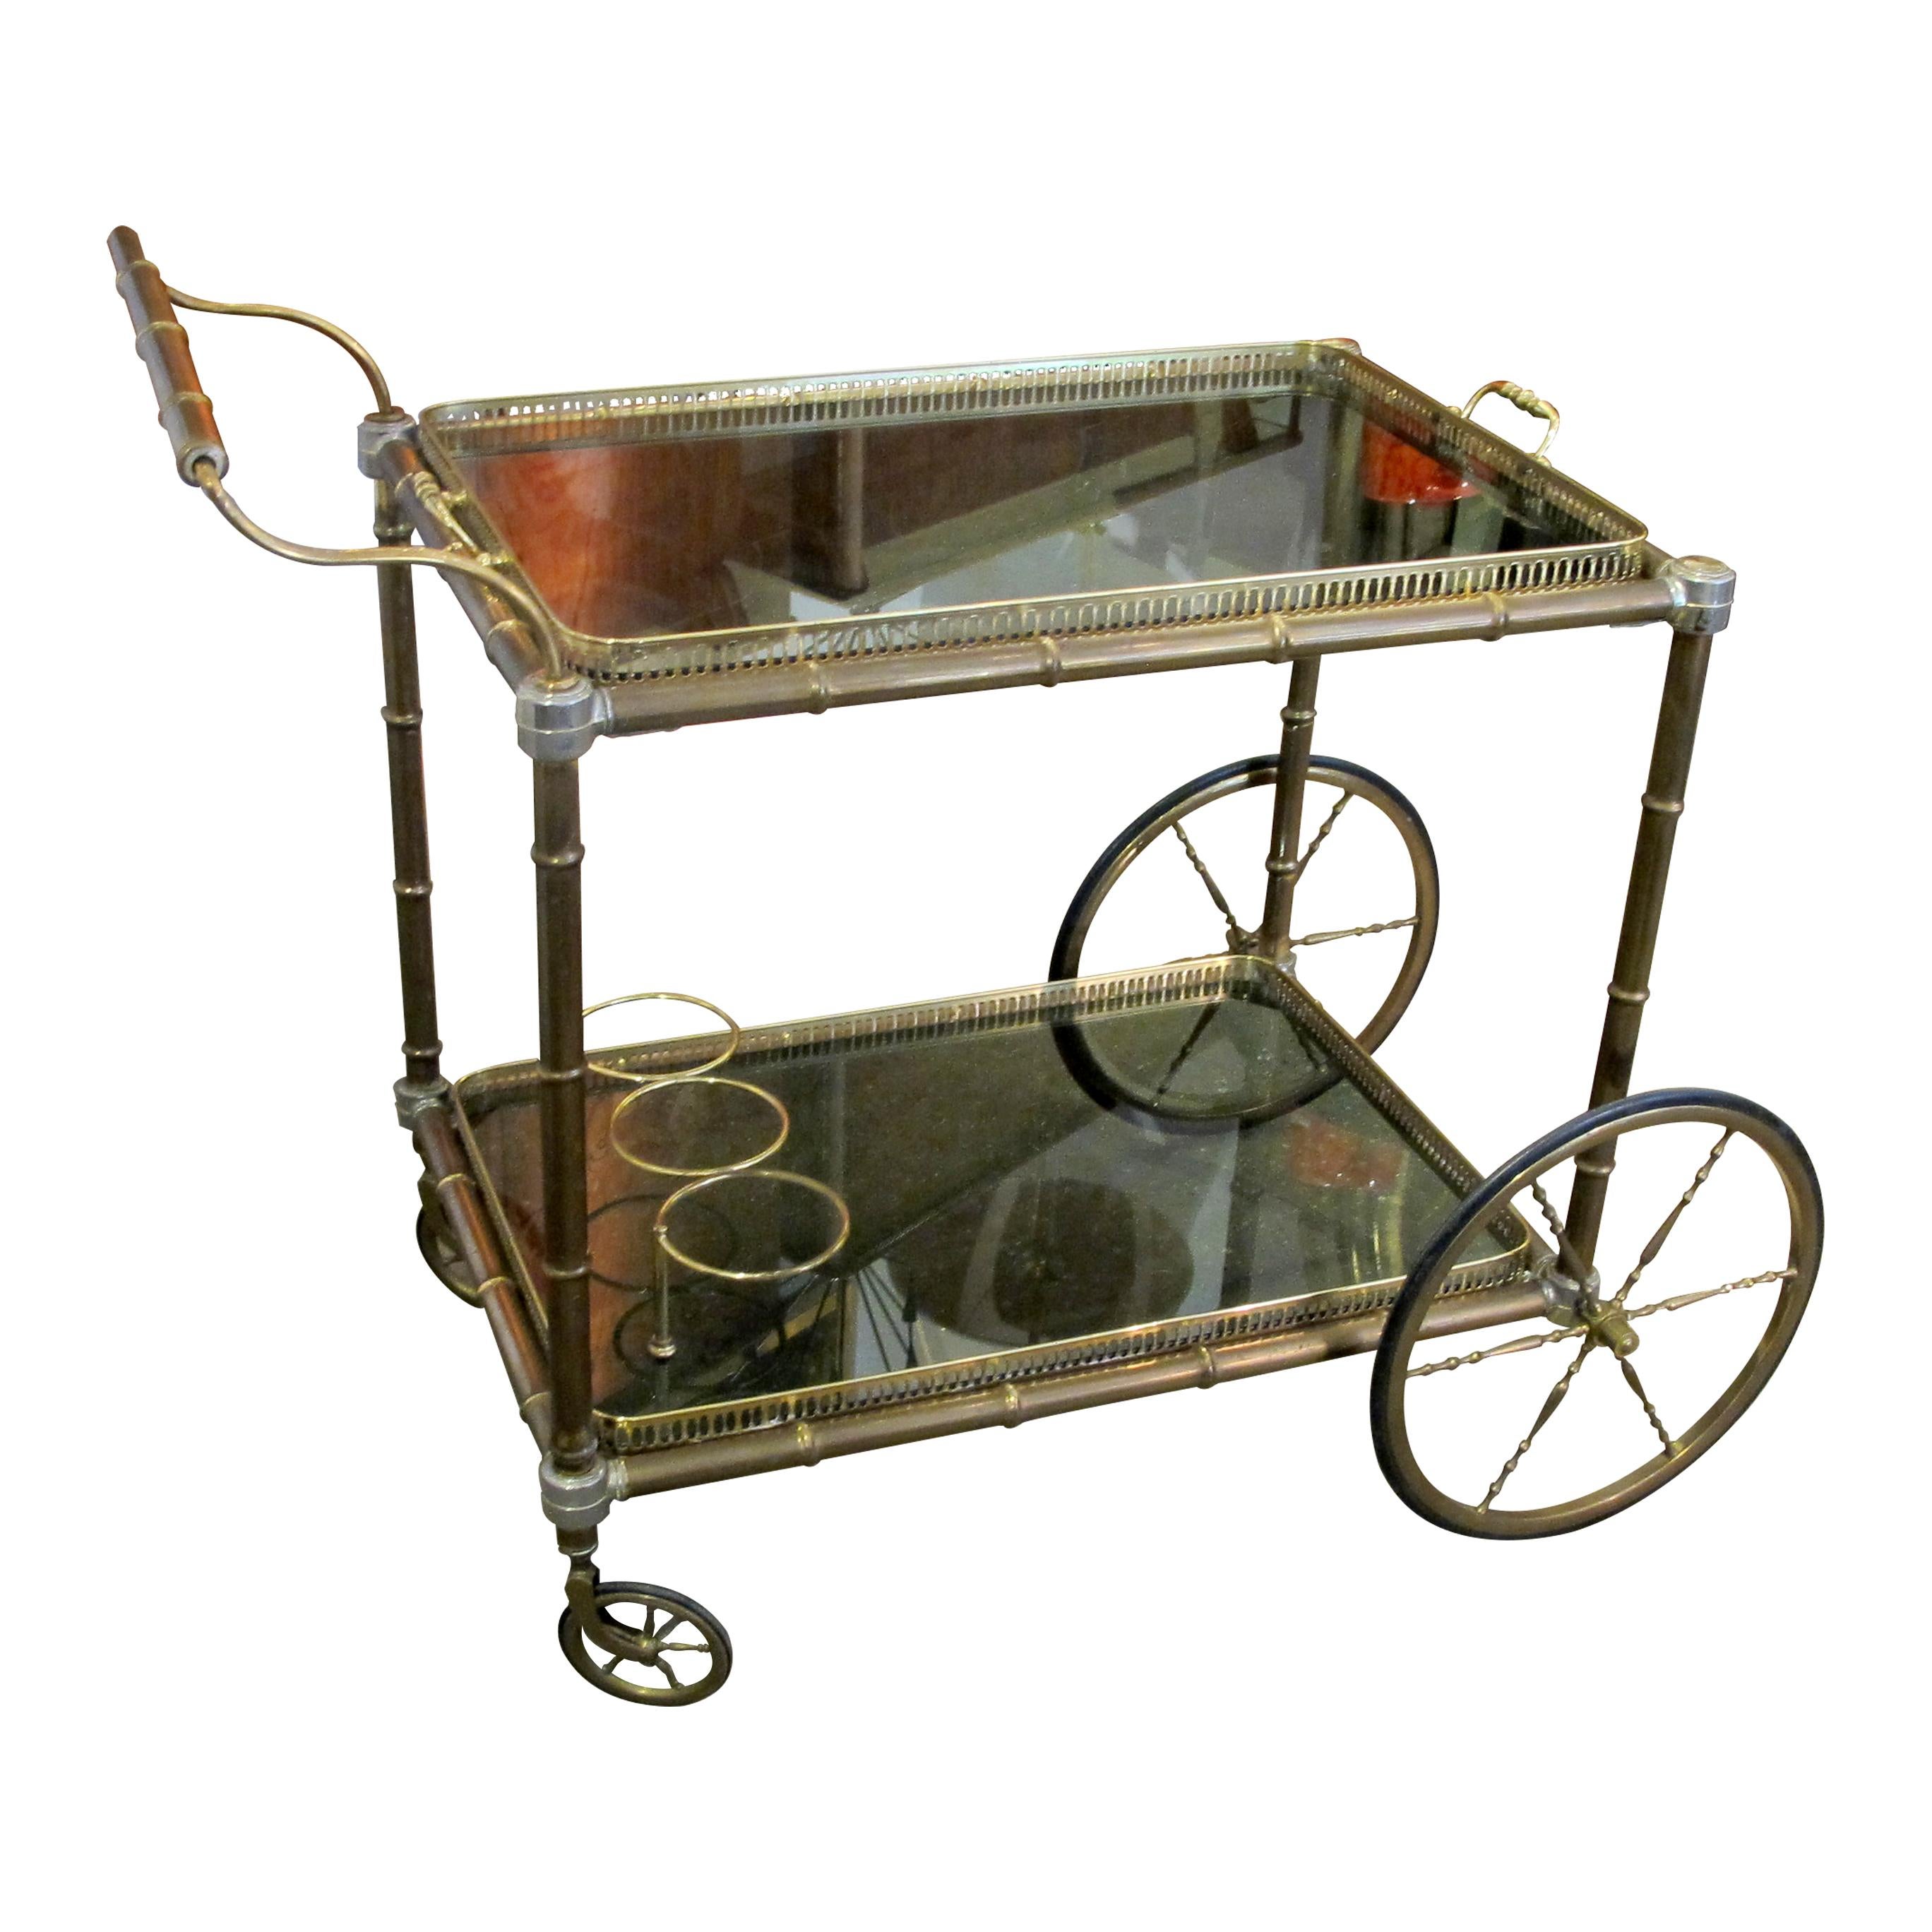 Other 1960s French Brass Serving Bar Cart or Drinks Trolley on Wheels Inc Serving Tray